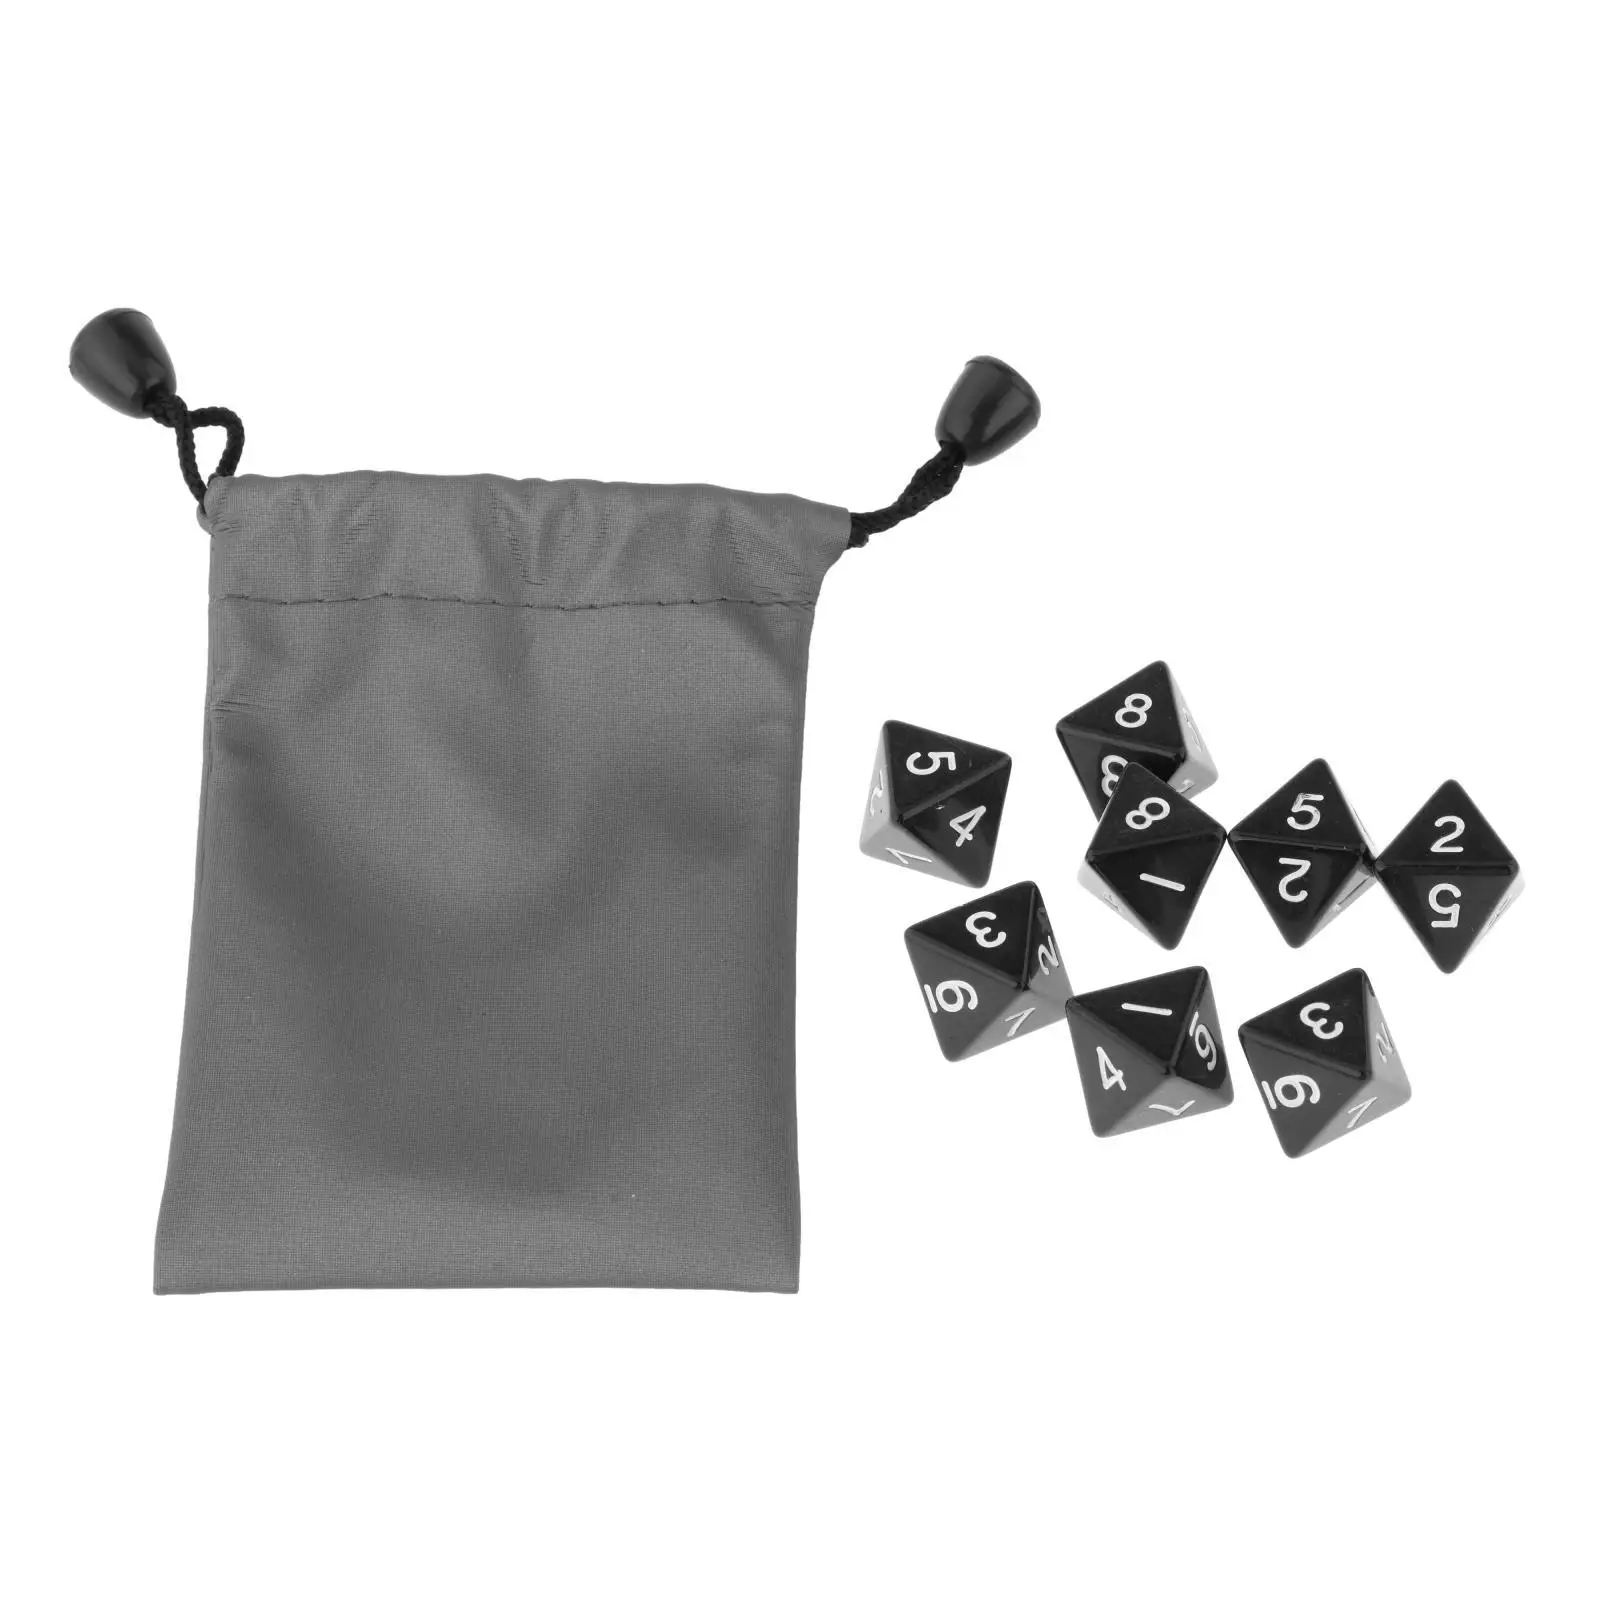 8x Acrylic D8 Digital Dice with Storage Bag Party Supplies Role Playing Dice Set Family Games for Adults Children Kids Teens